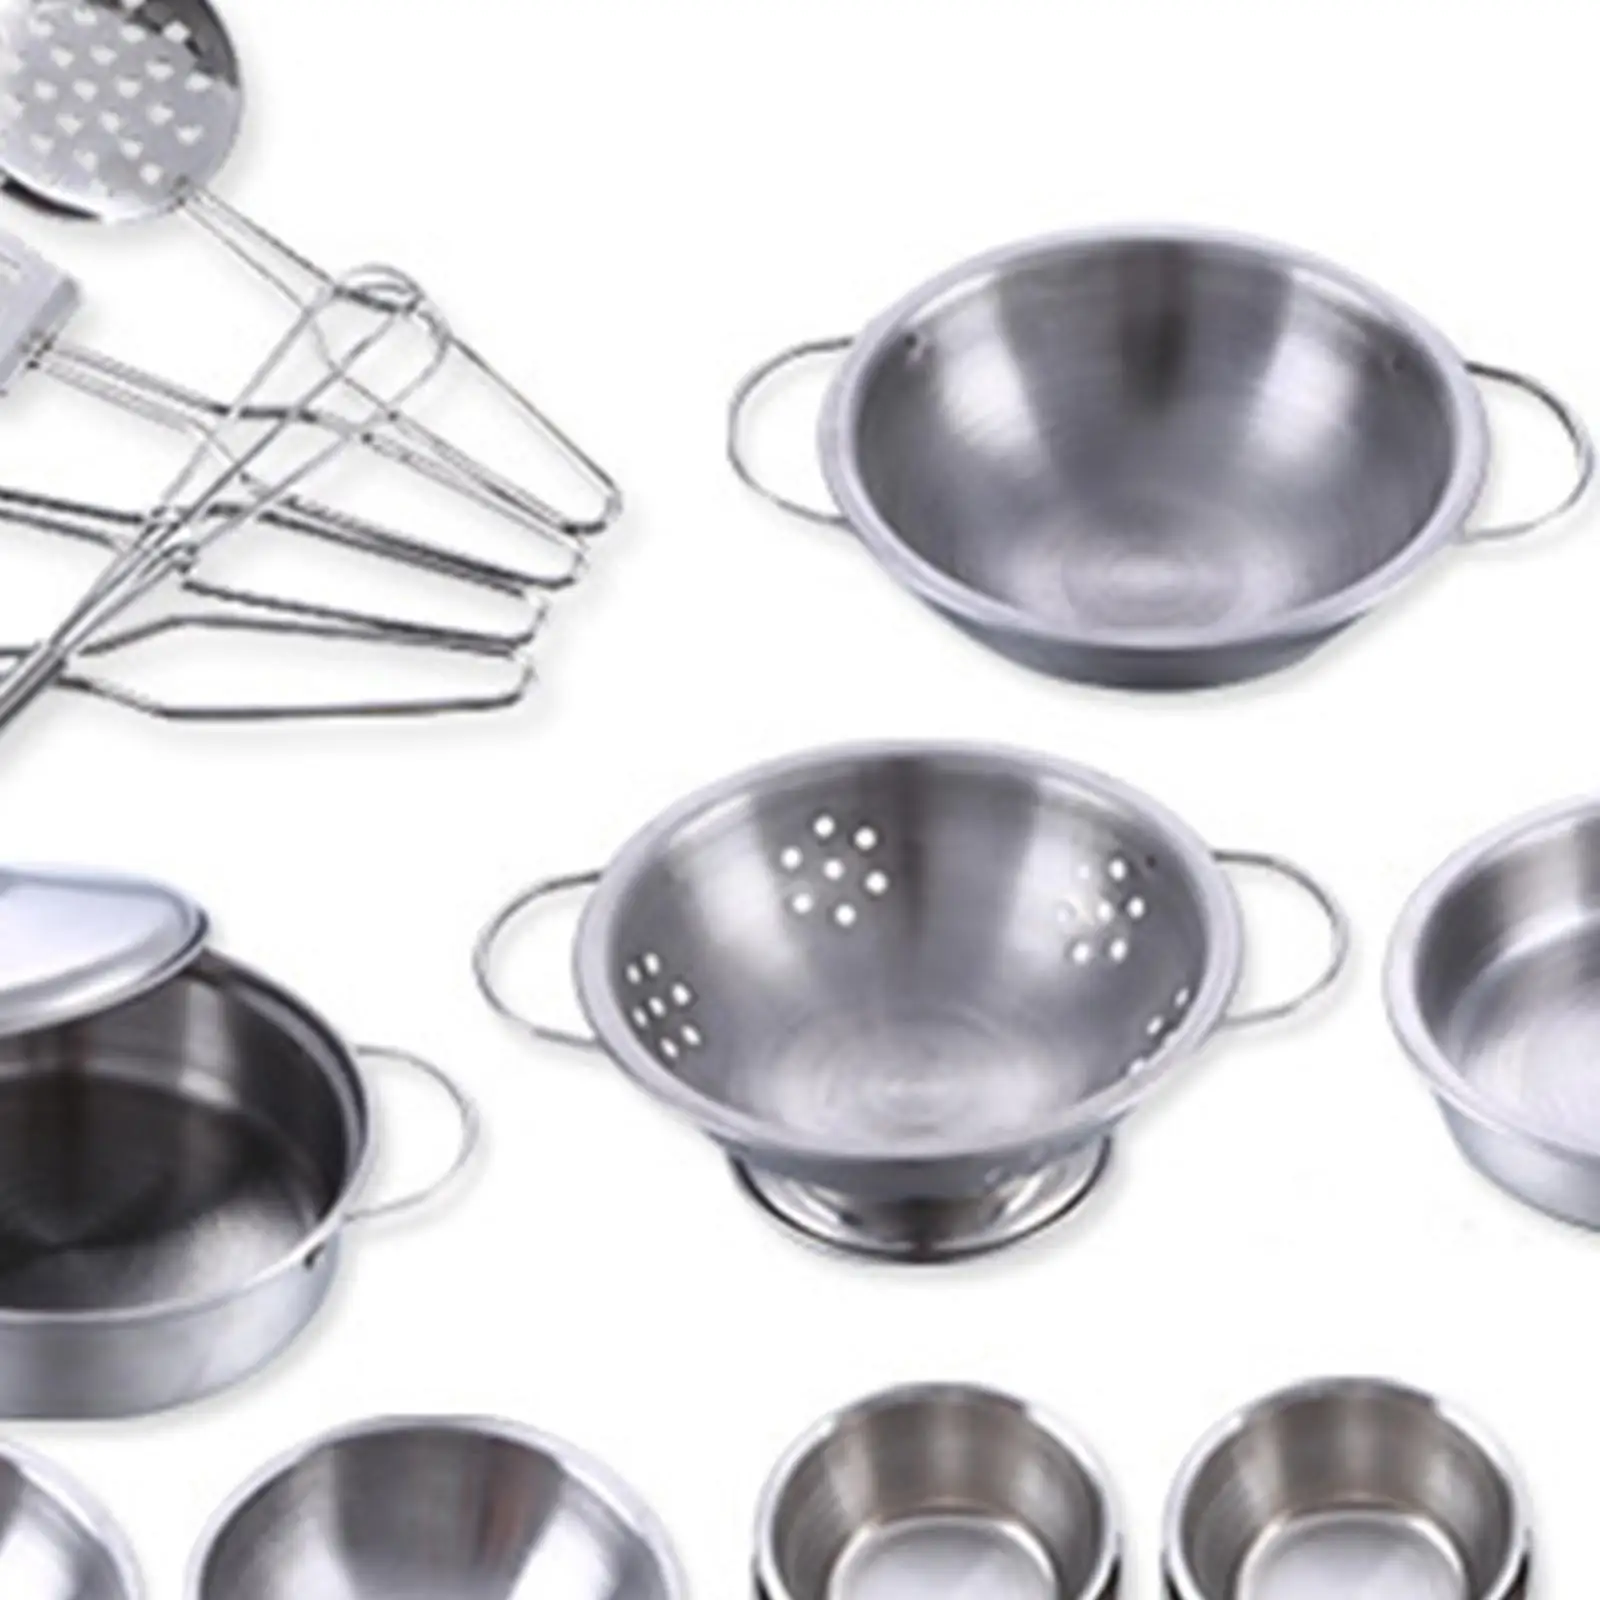 25Pcs Kitchen Pretend Toys Cooking Utensils Stainless Steel Food Grade